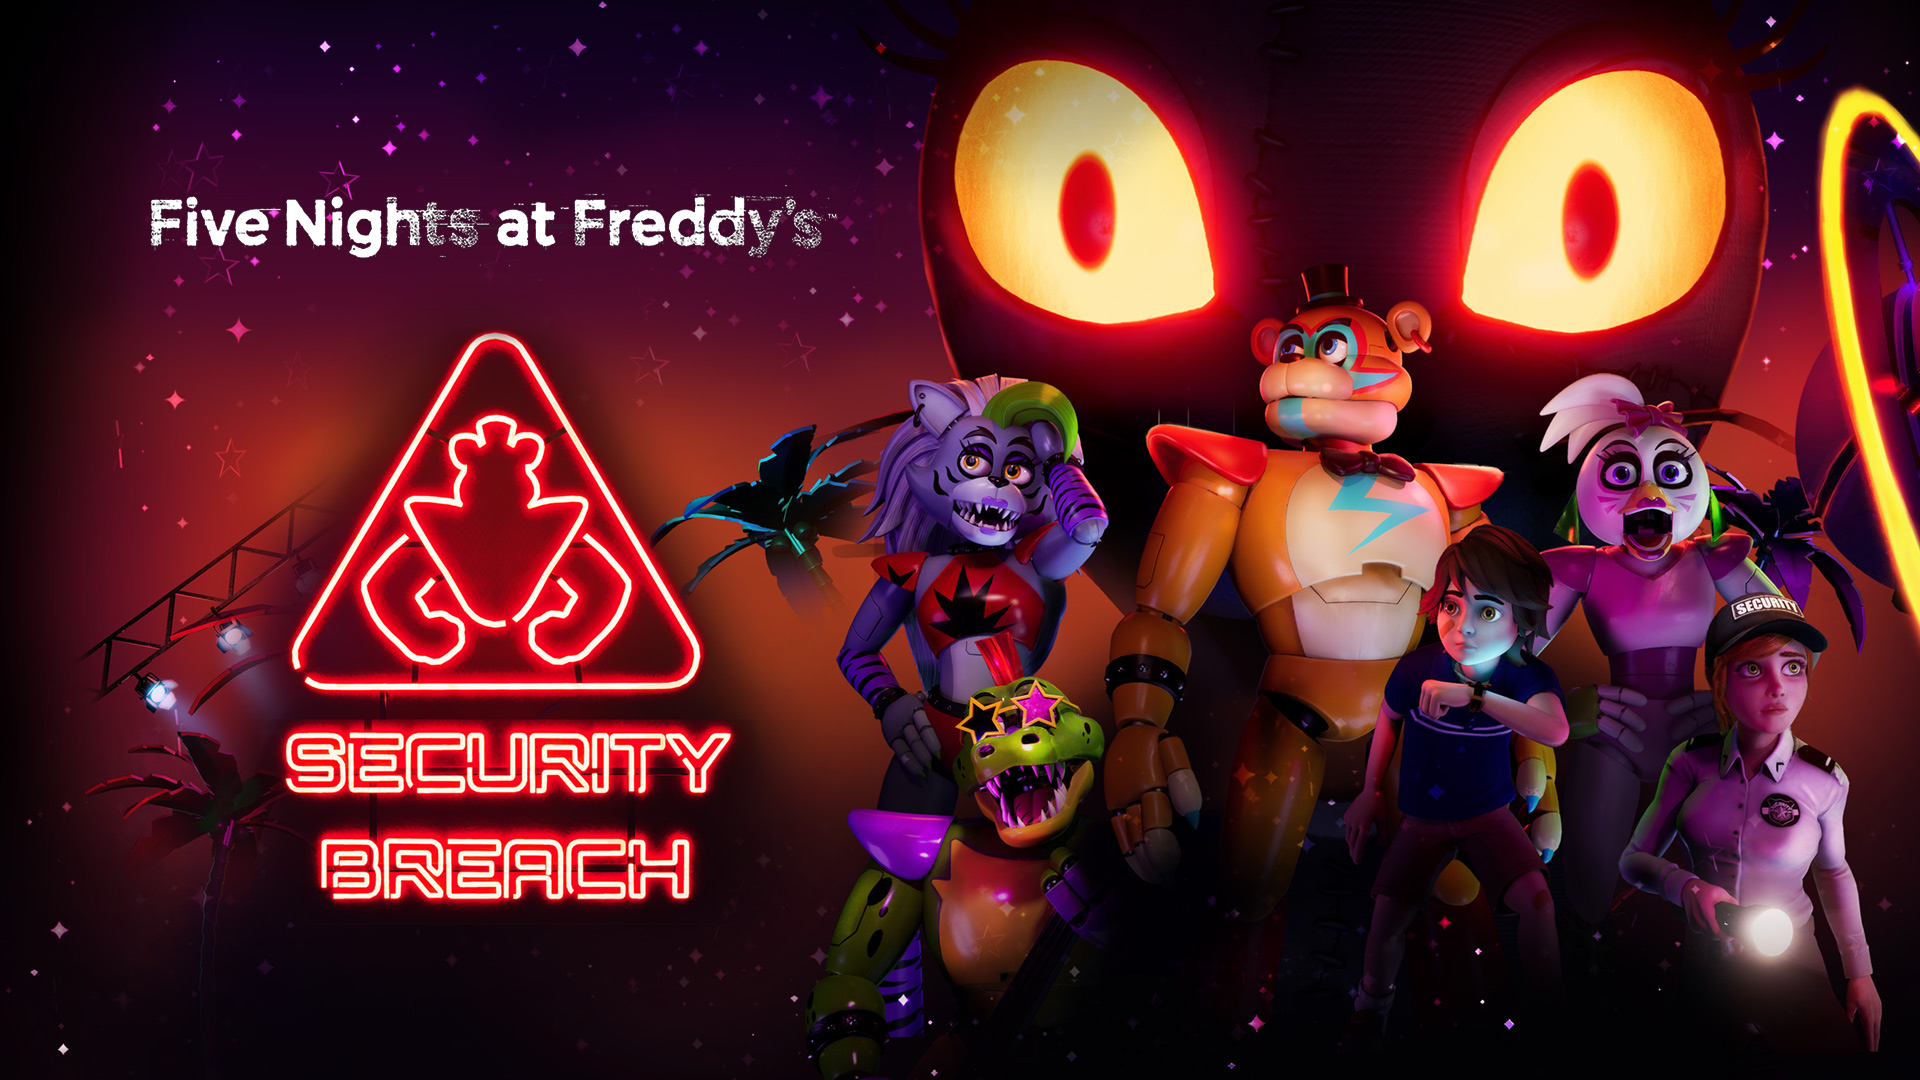 Five Nights At Freddys Security Breach Wallpaper by GareBearArt1 on  DeviantArt